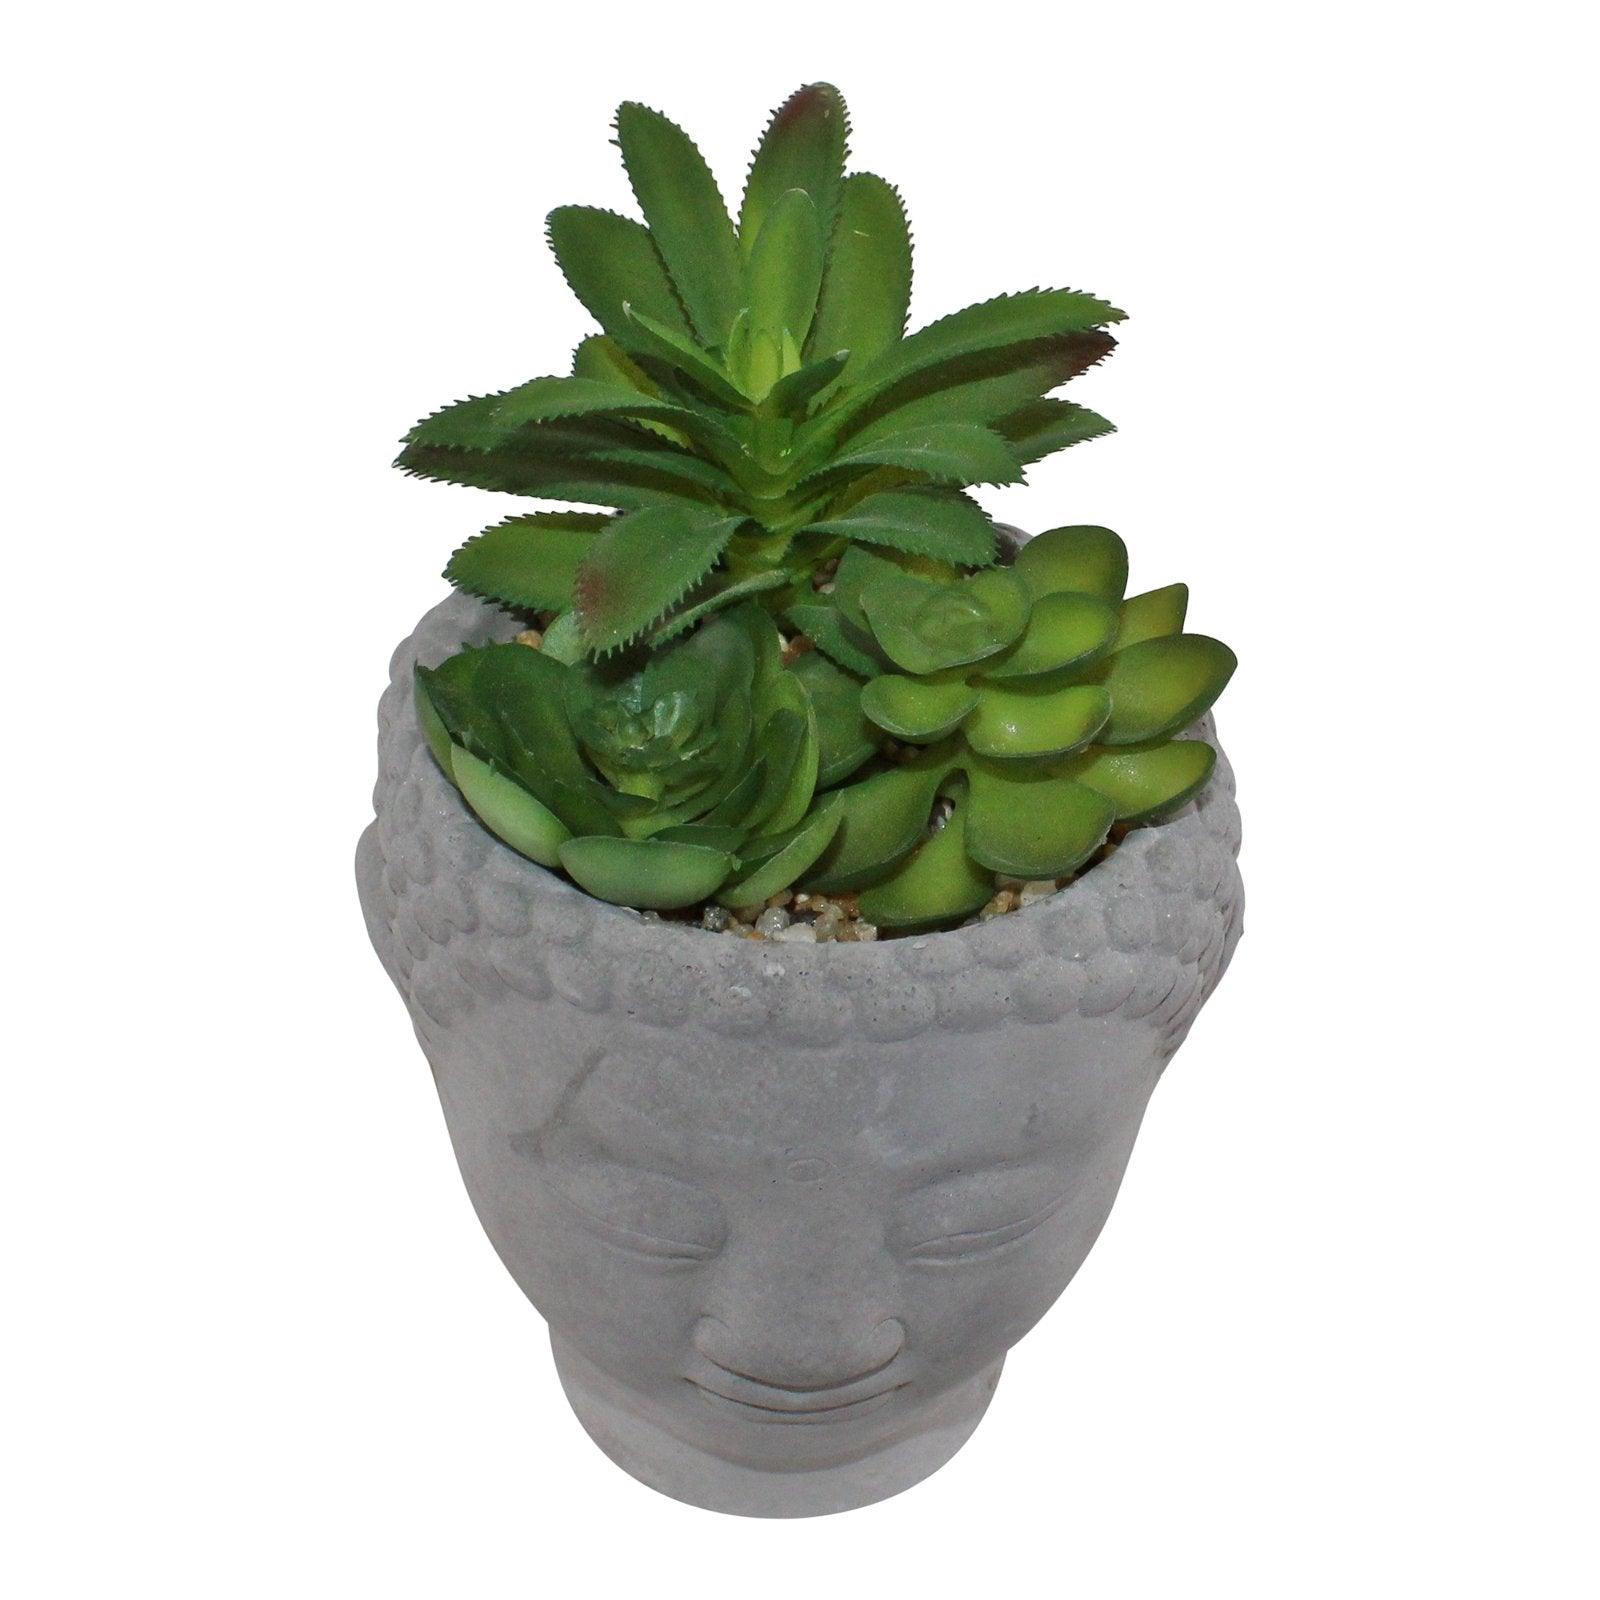 View Trio of Faux Succulents in Buddha Head Cement Pot information